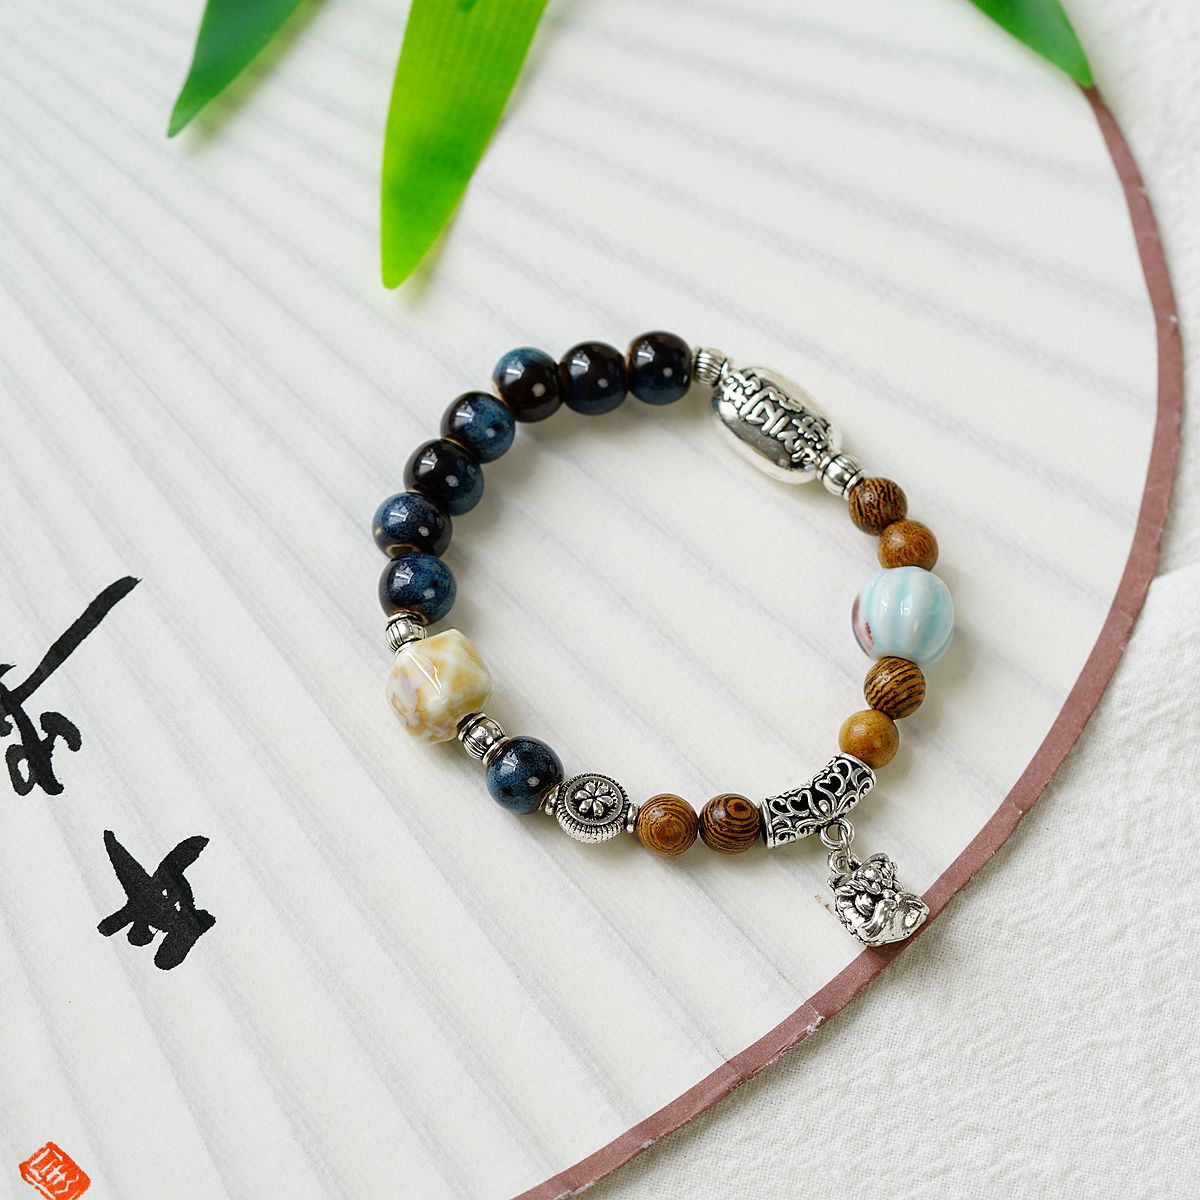 Accessories Strictly Selected Maillard Jingdezhen Ceramic Bracelet Female Gift Student National Style Creative Chinese Style Simple Bracelet